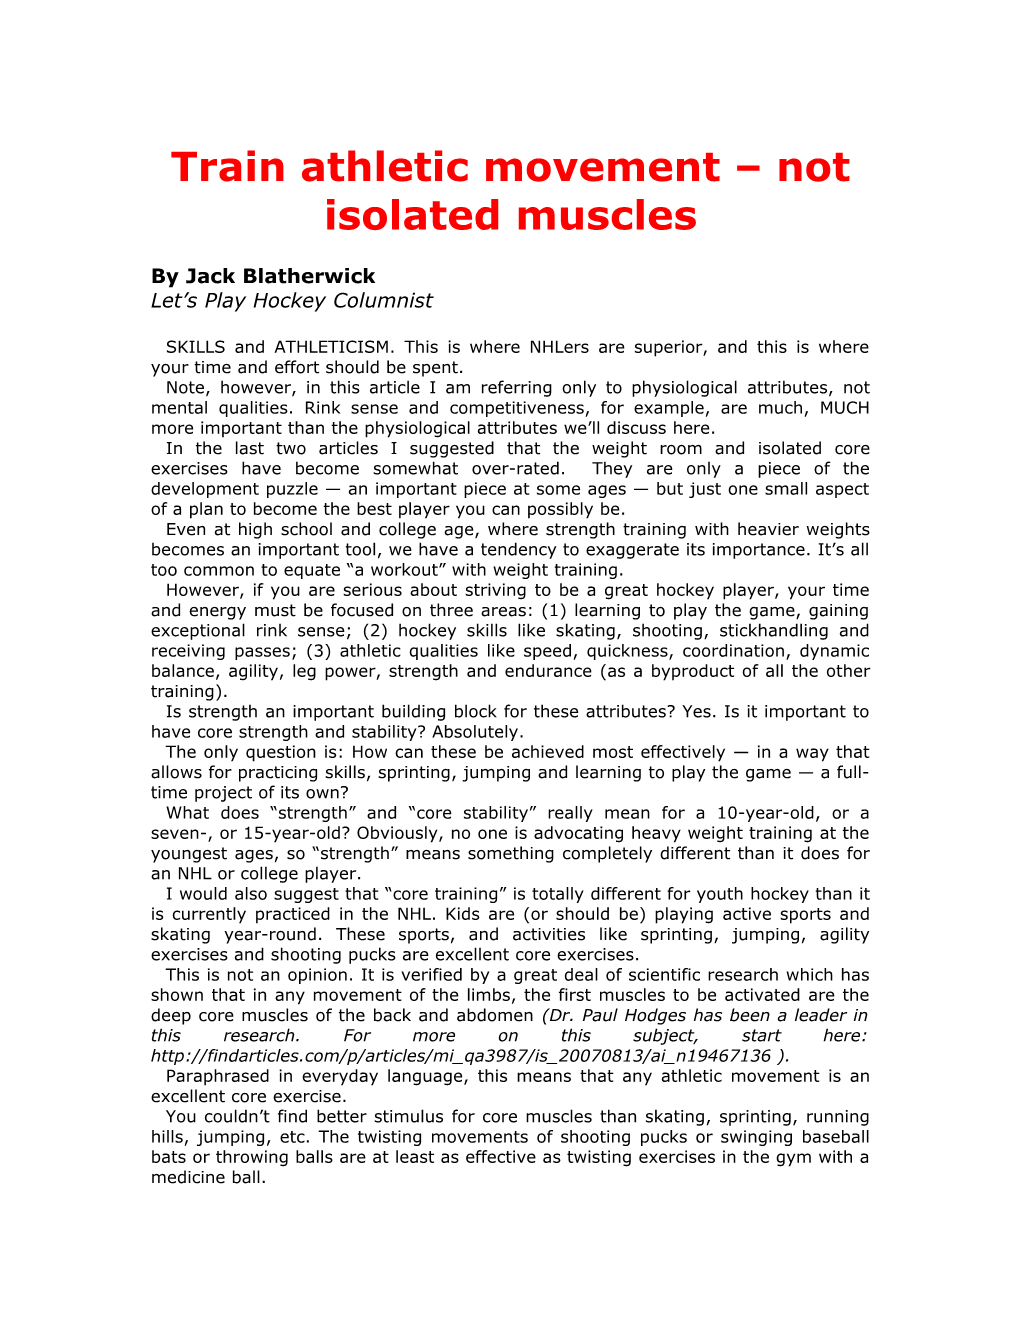 Train Athletic Movement Not Isolated Muscles